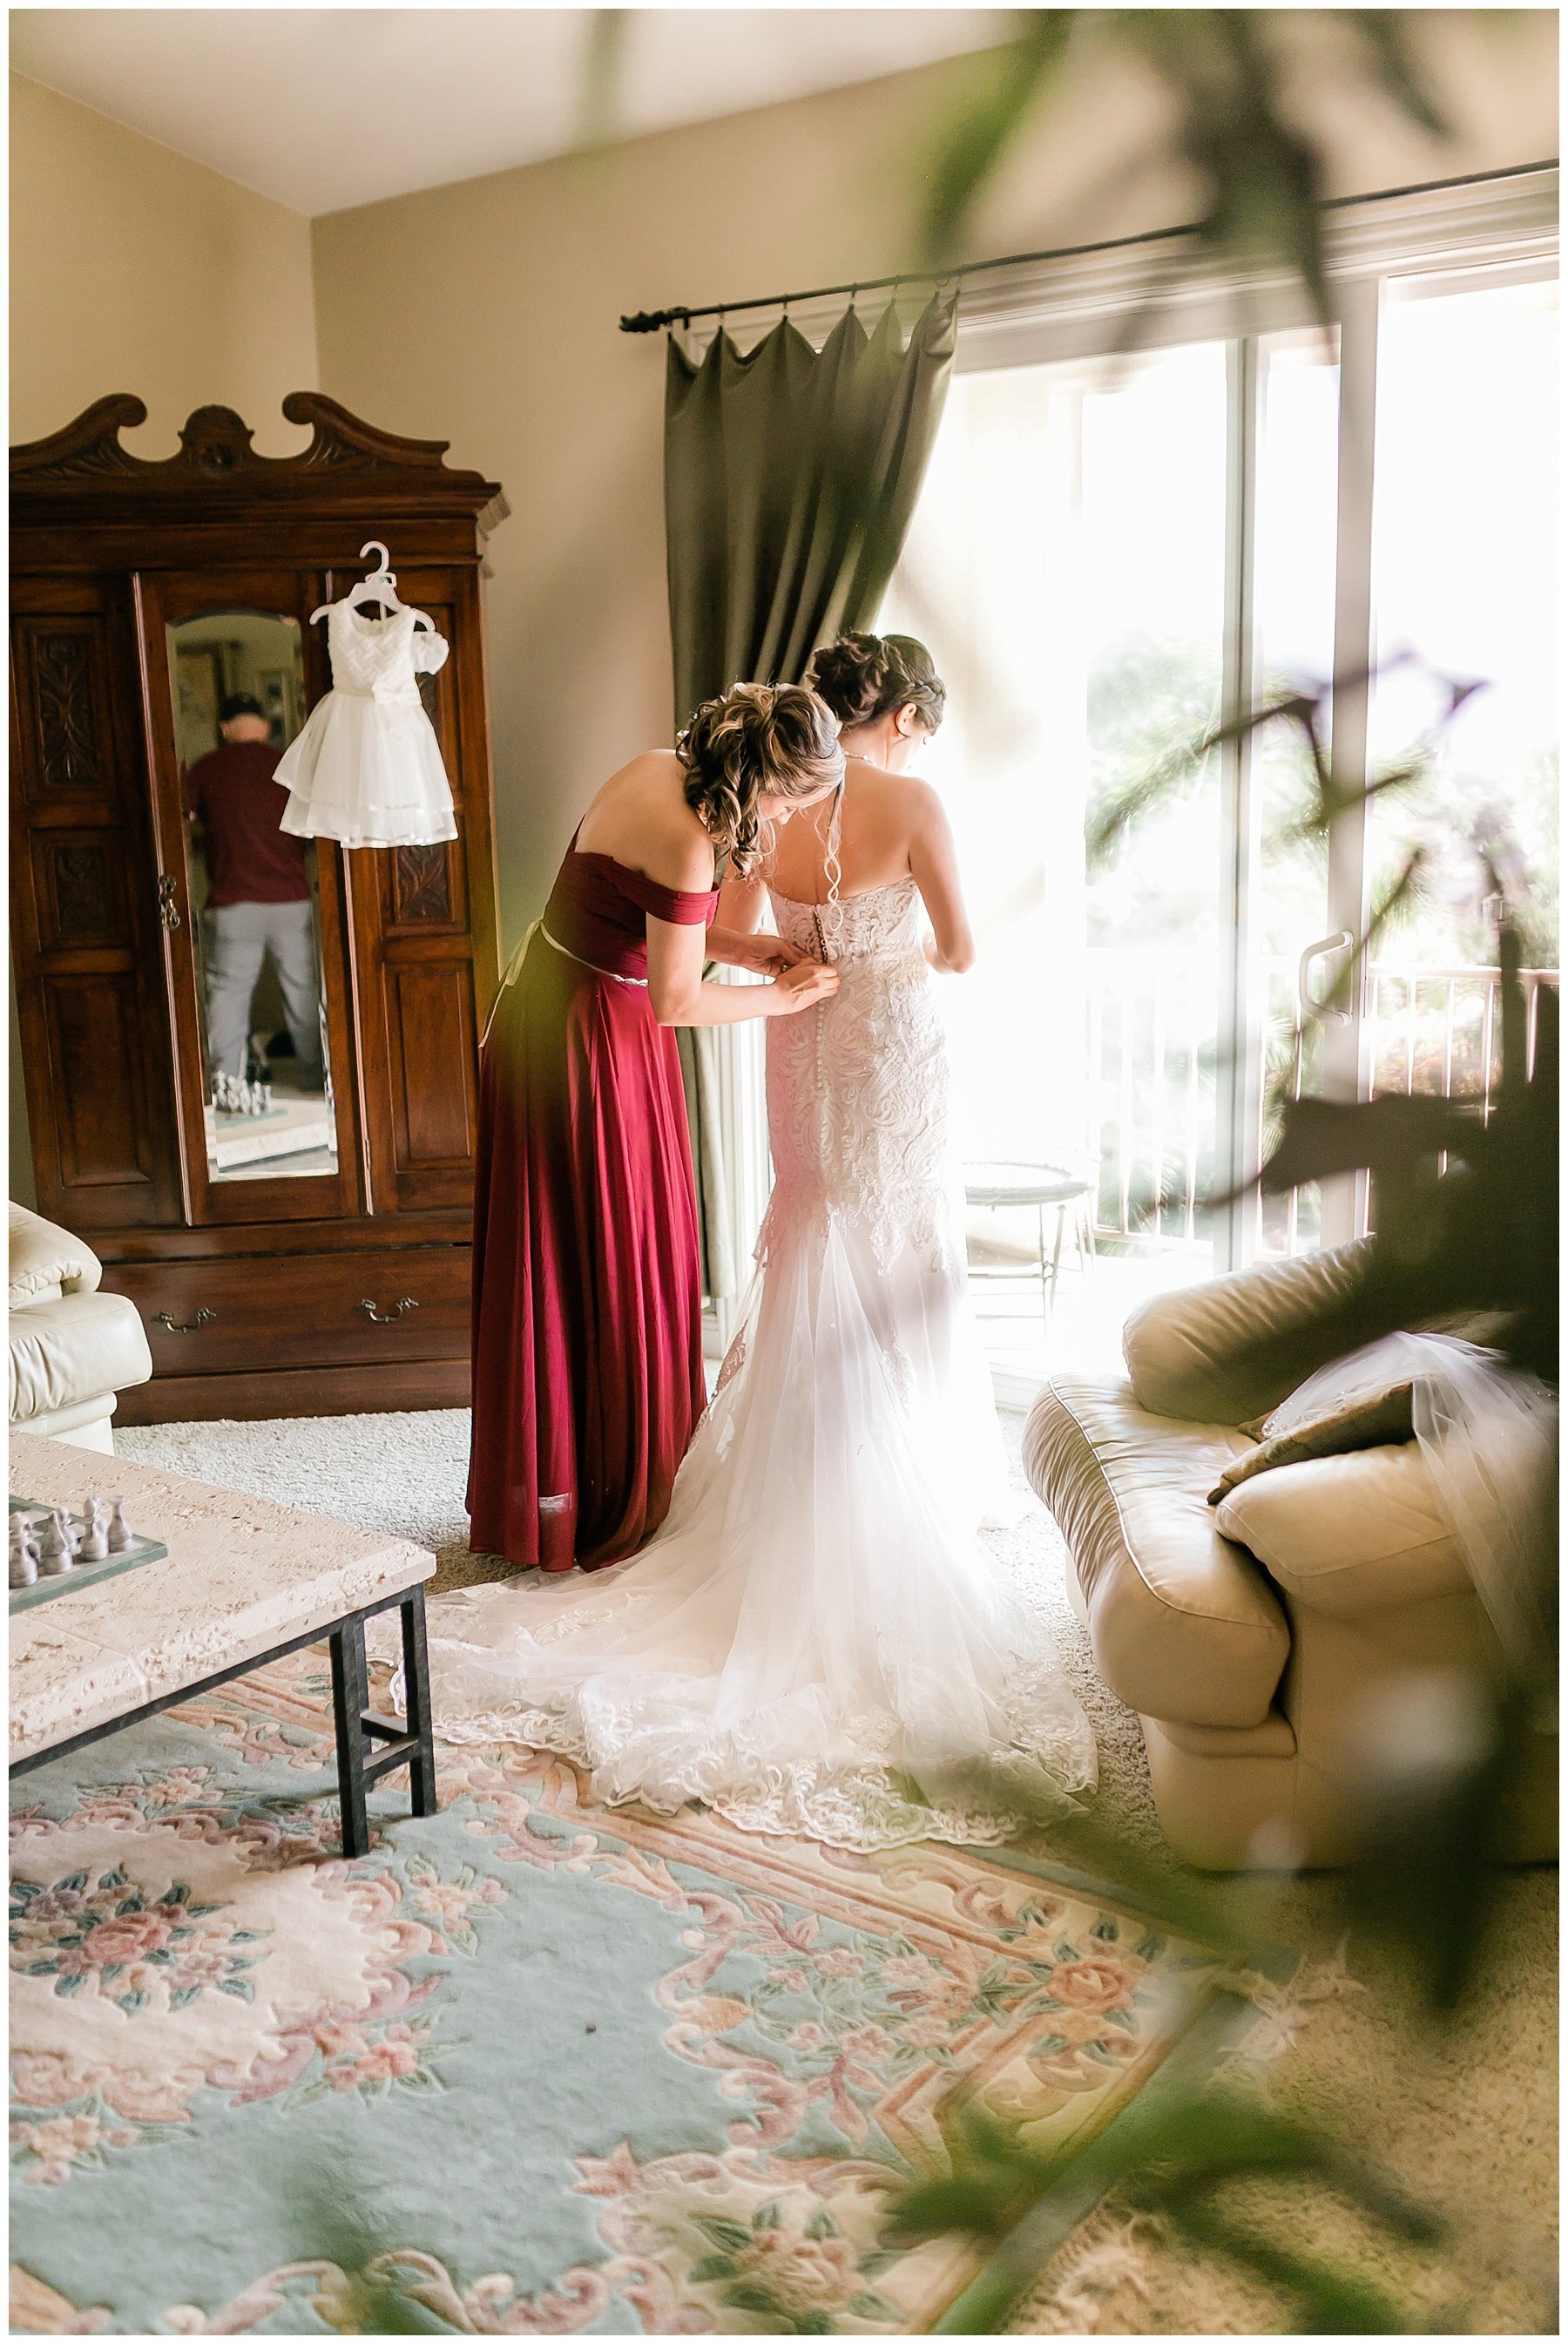  maid of honor helping bride get into her gown 